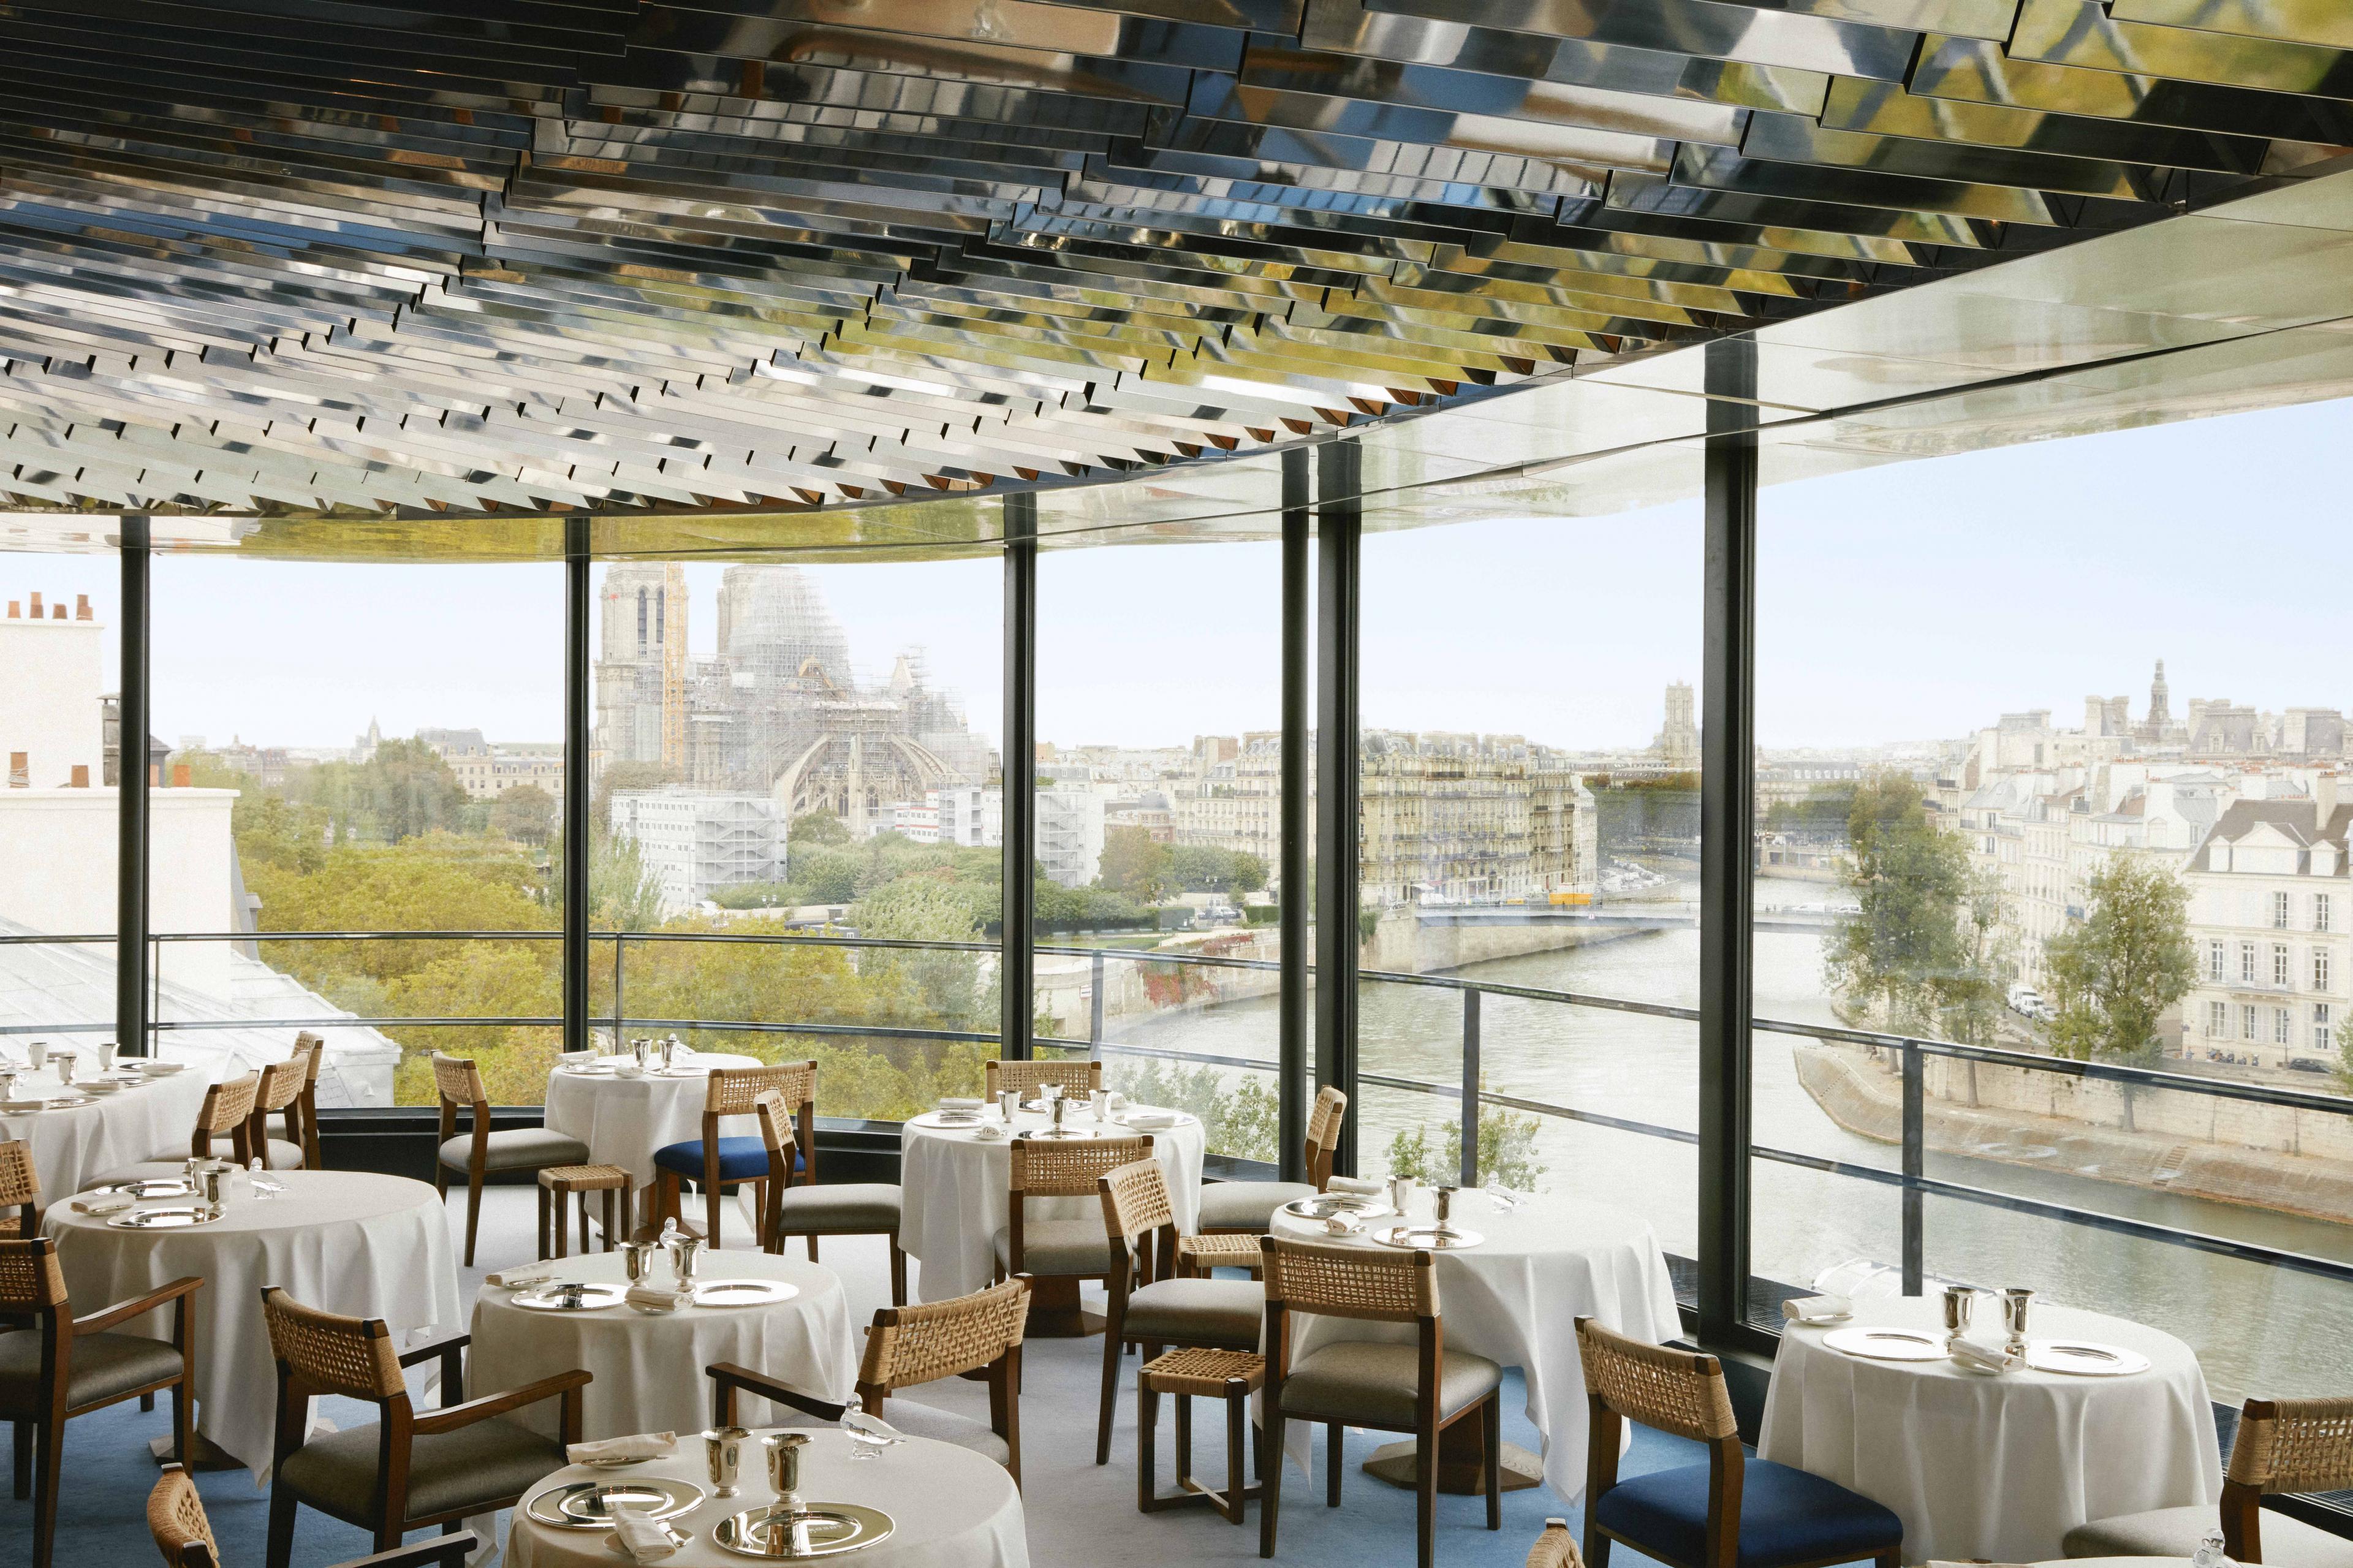 restaurant with floor to ceiling glass windows overlooking a river in a city